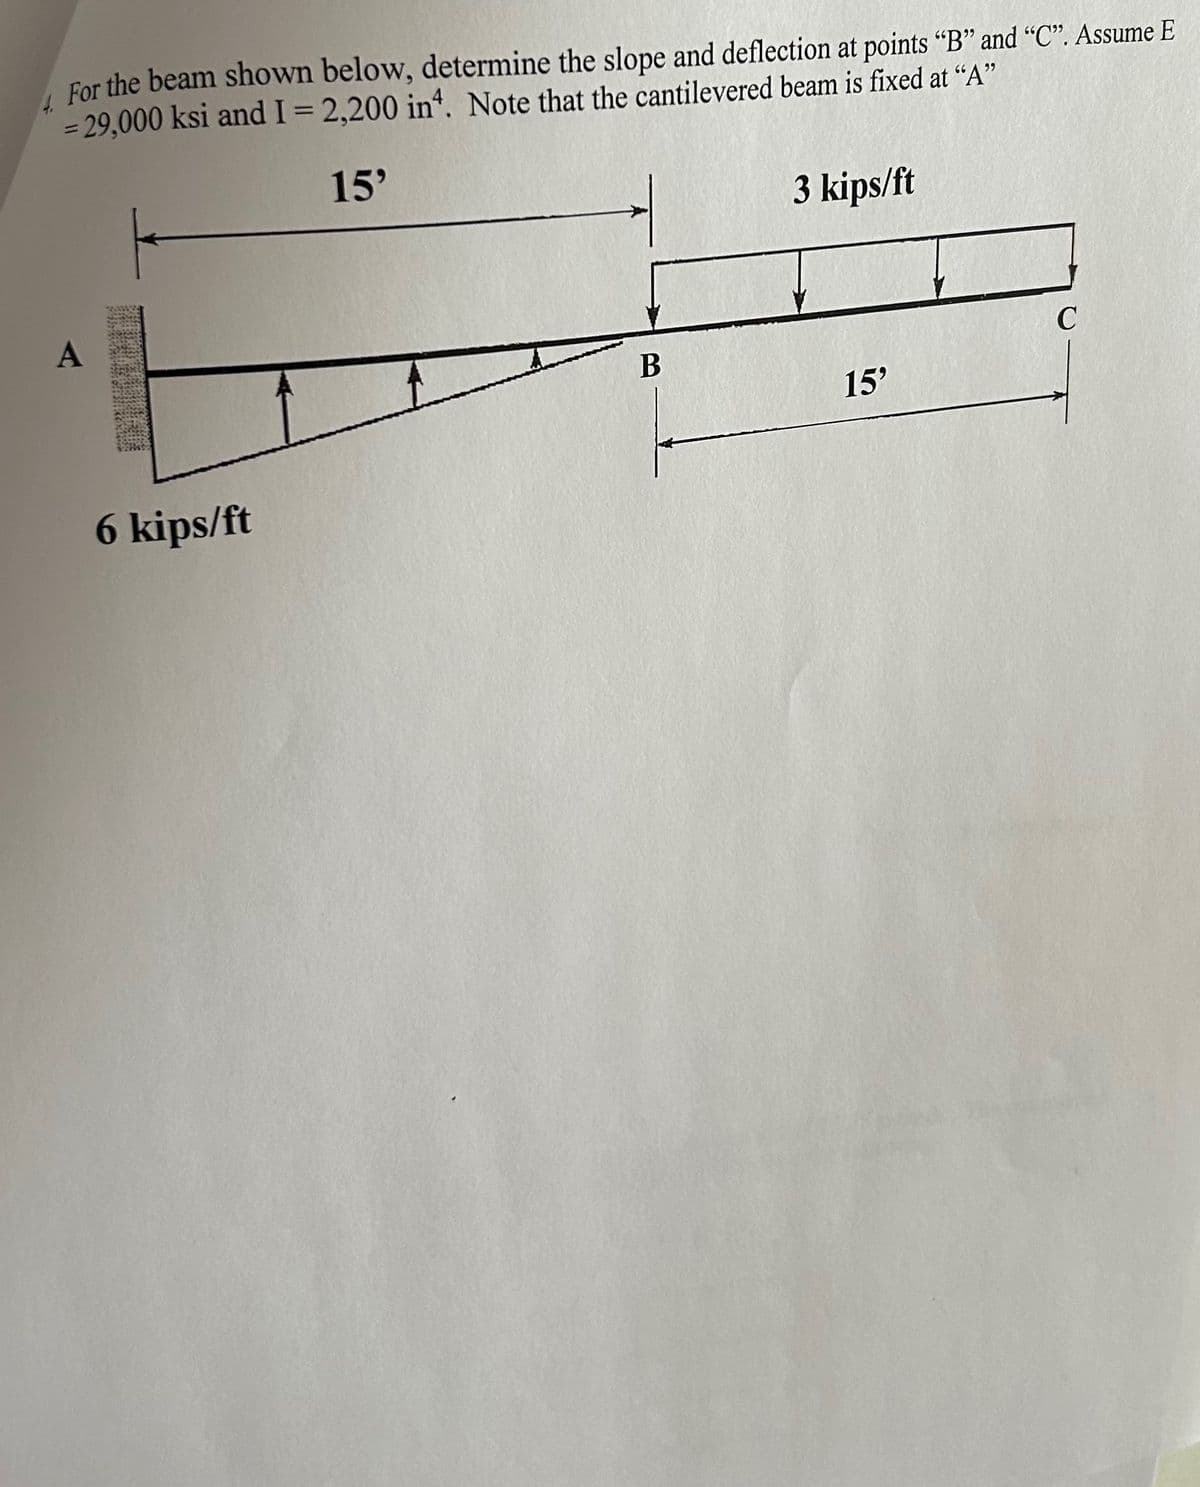 For the beam shown below, determine the slope and deflection at points "B" and "C". Assume E
= 29,000 ksi and I = 2,200 in4. Note that the cantilevered beam is fixed at "A"
15'
A
6 kips/ft
B
3 kips/ft
15'
C